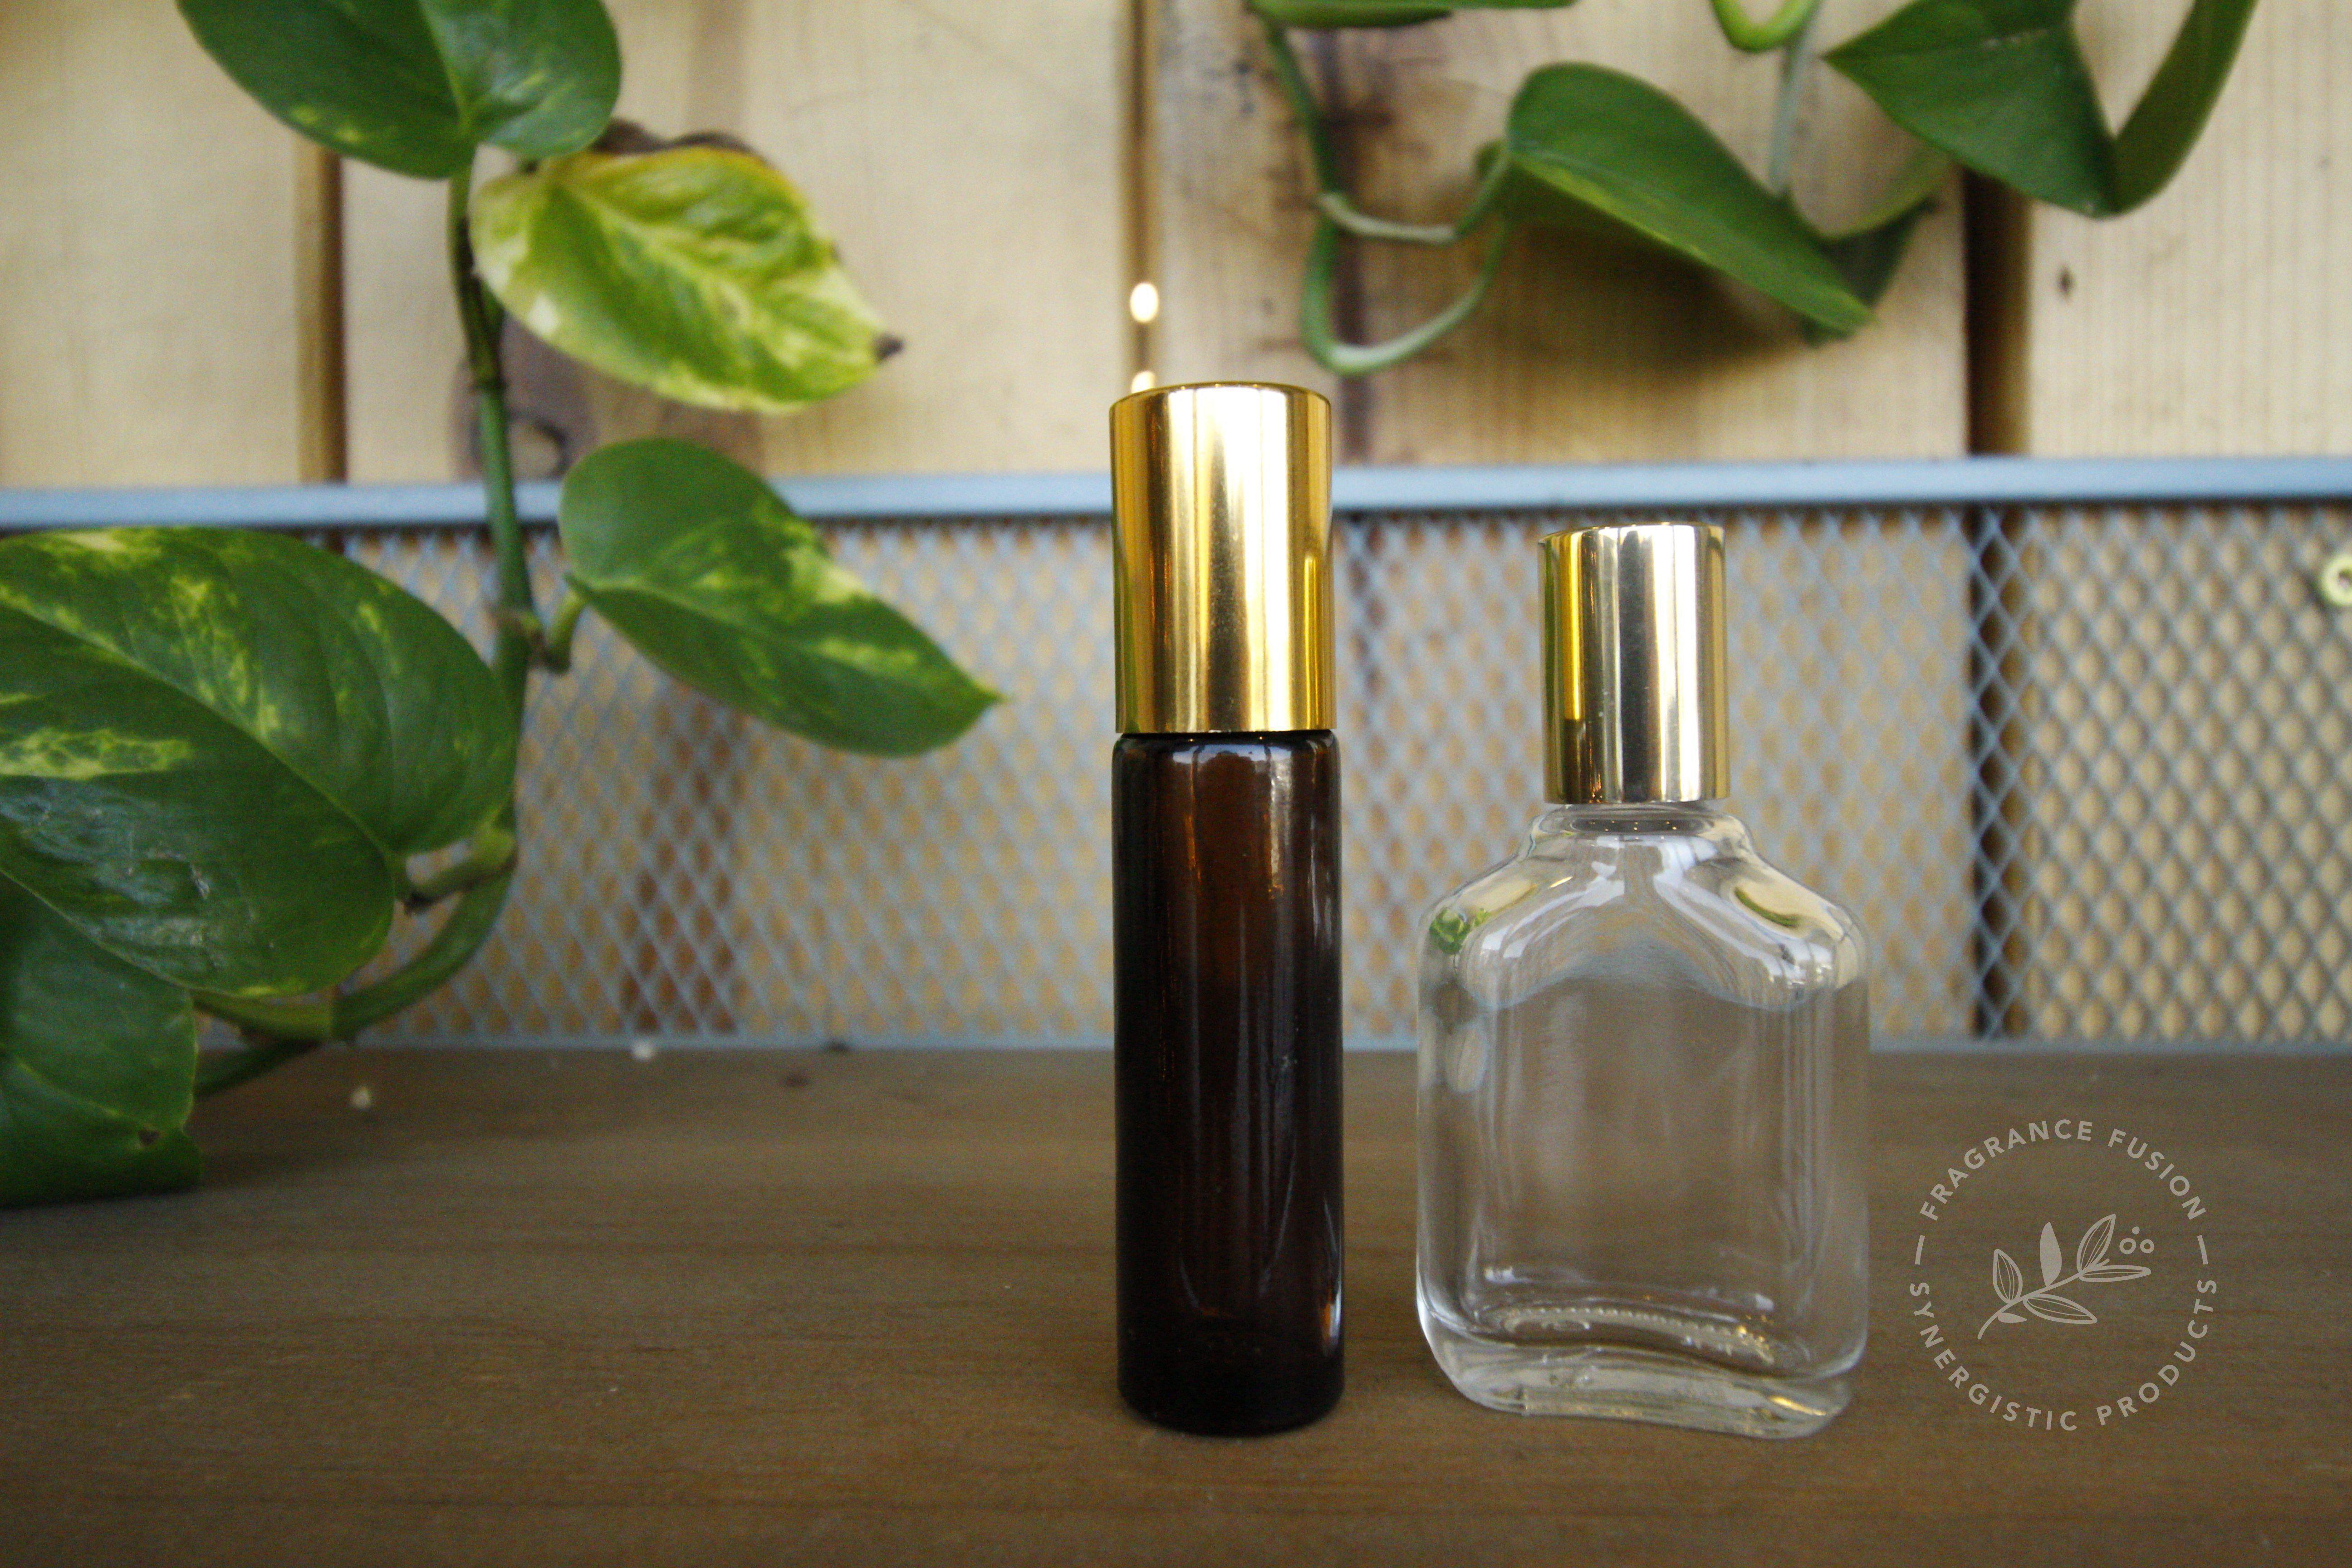 Nature's Oil Our Version of Chanel NO. 5 Fragrance Oil